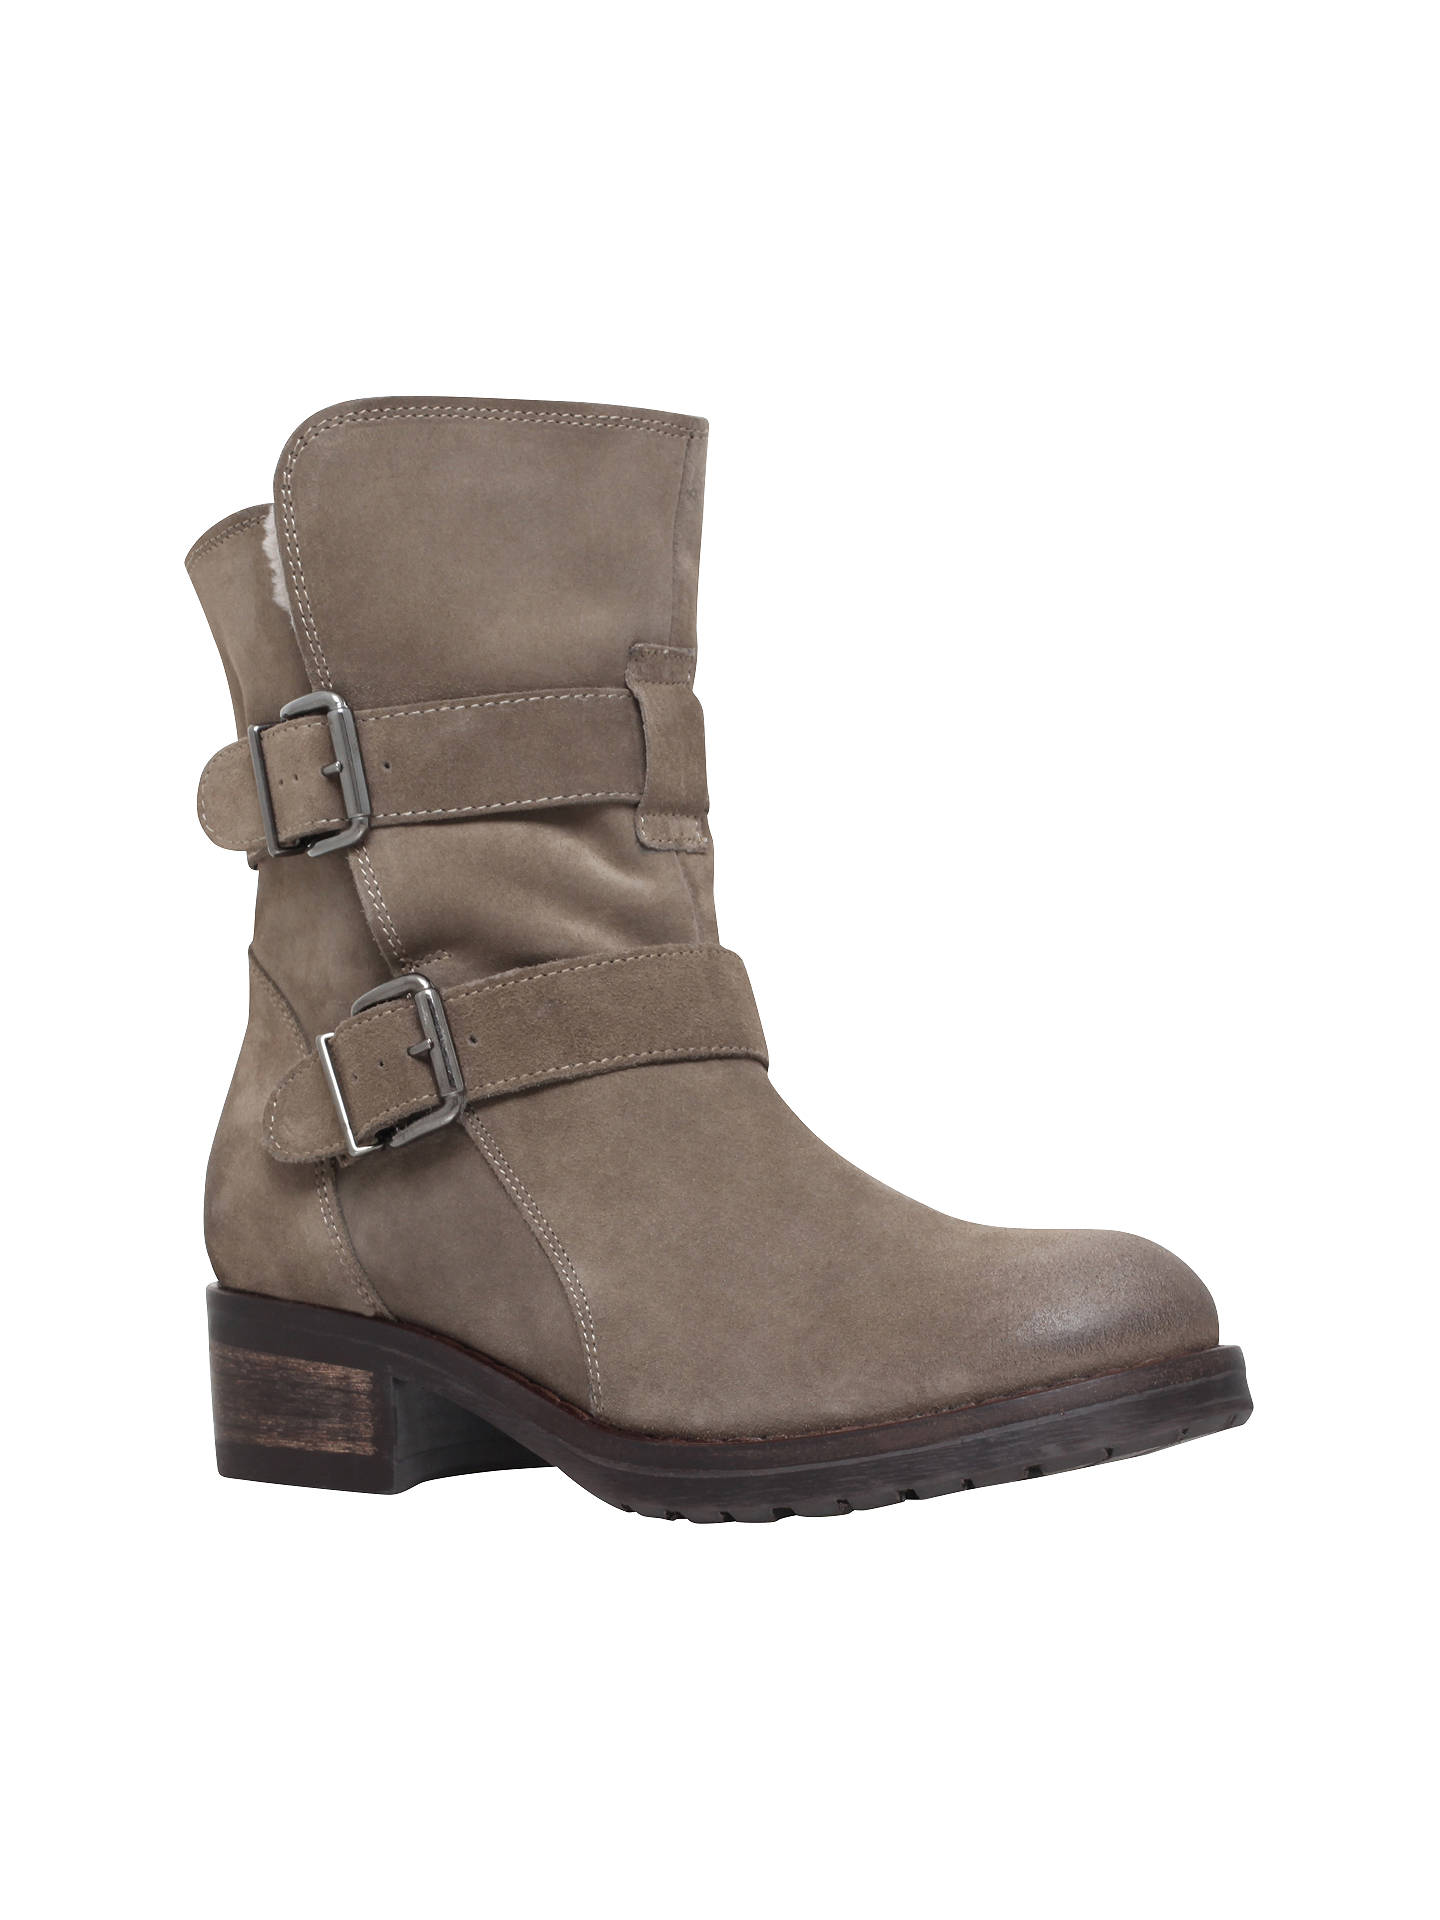 Kurt Geiger Richmond Buckle Ankle Boots, Taupe at John Lewis & Partners